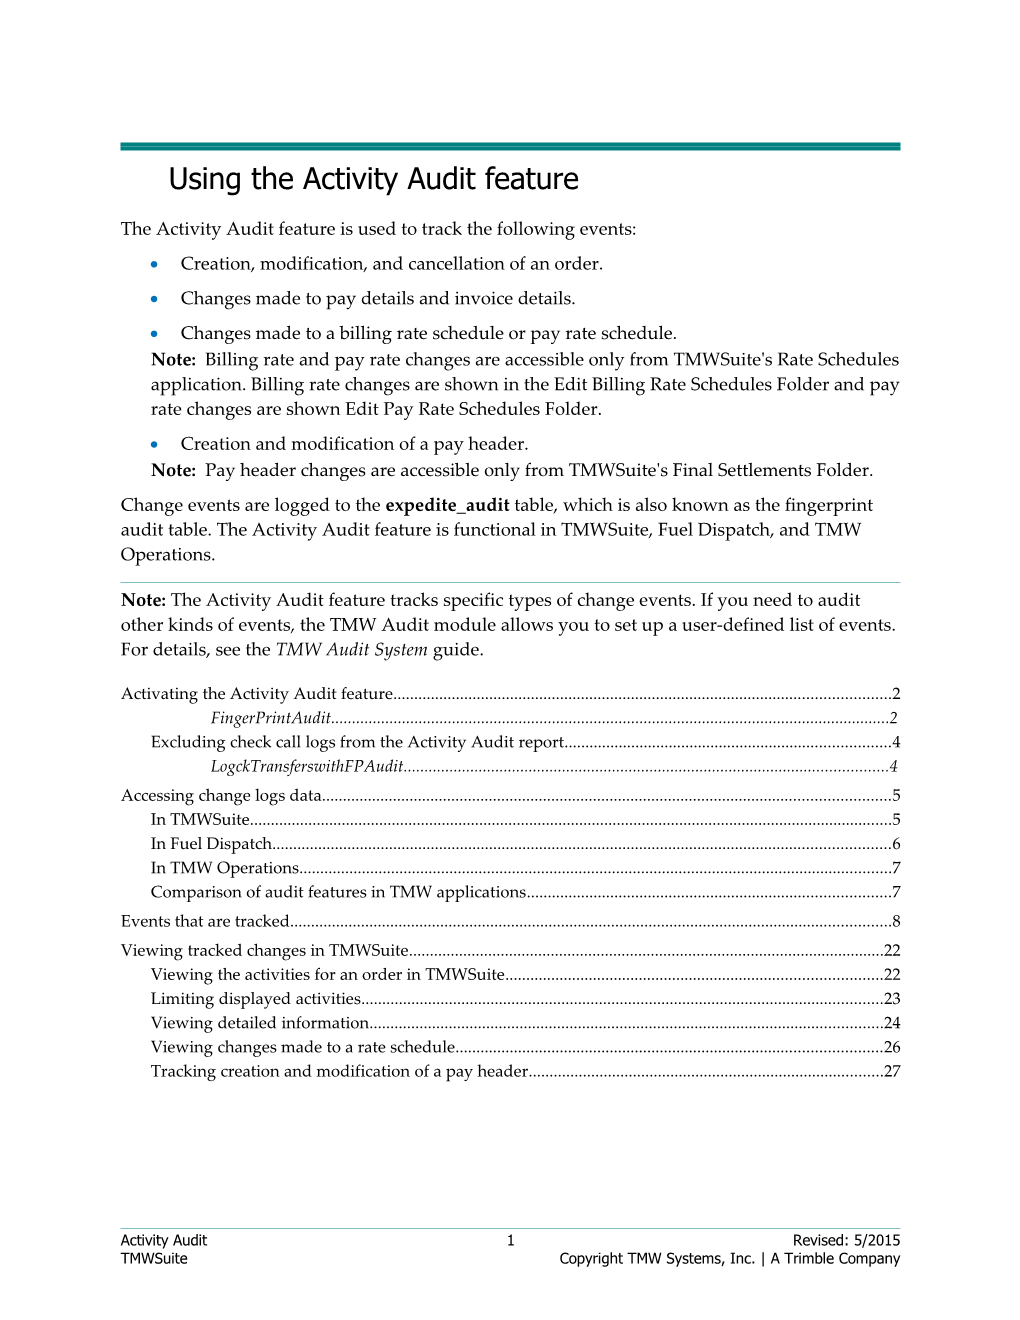 Using the Activity Audit Feature